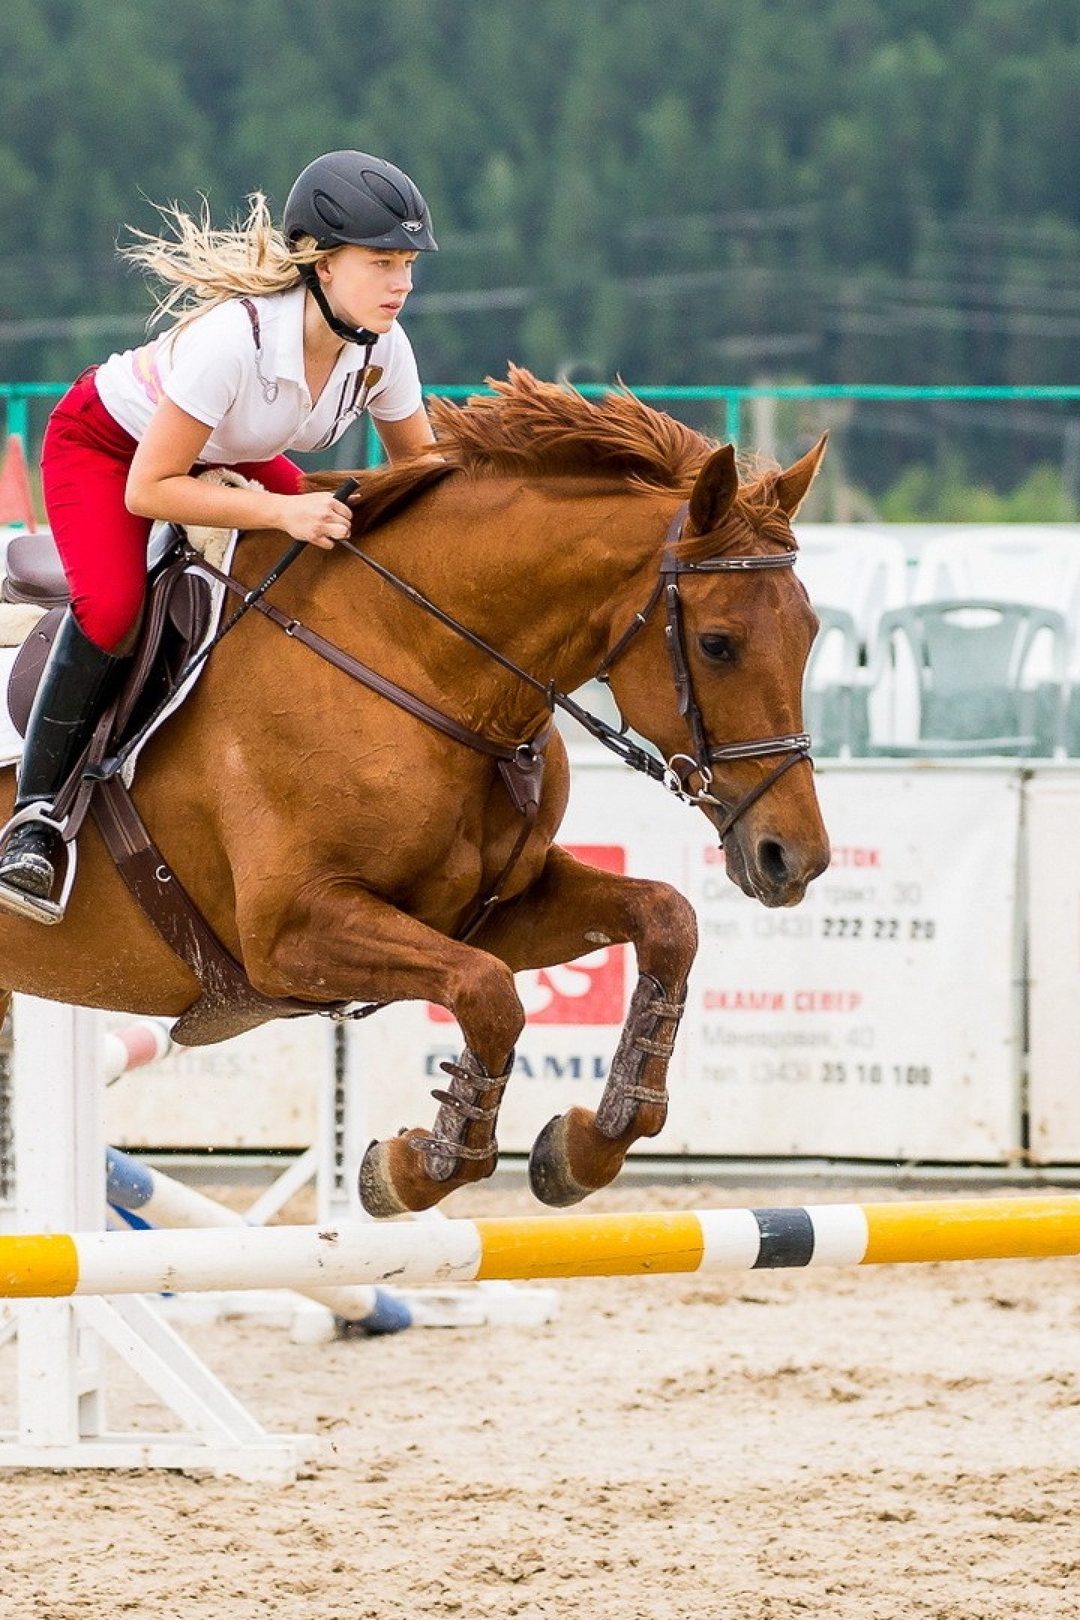 Image: Horse, jump, movement, girl, rider, helmet, outfit